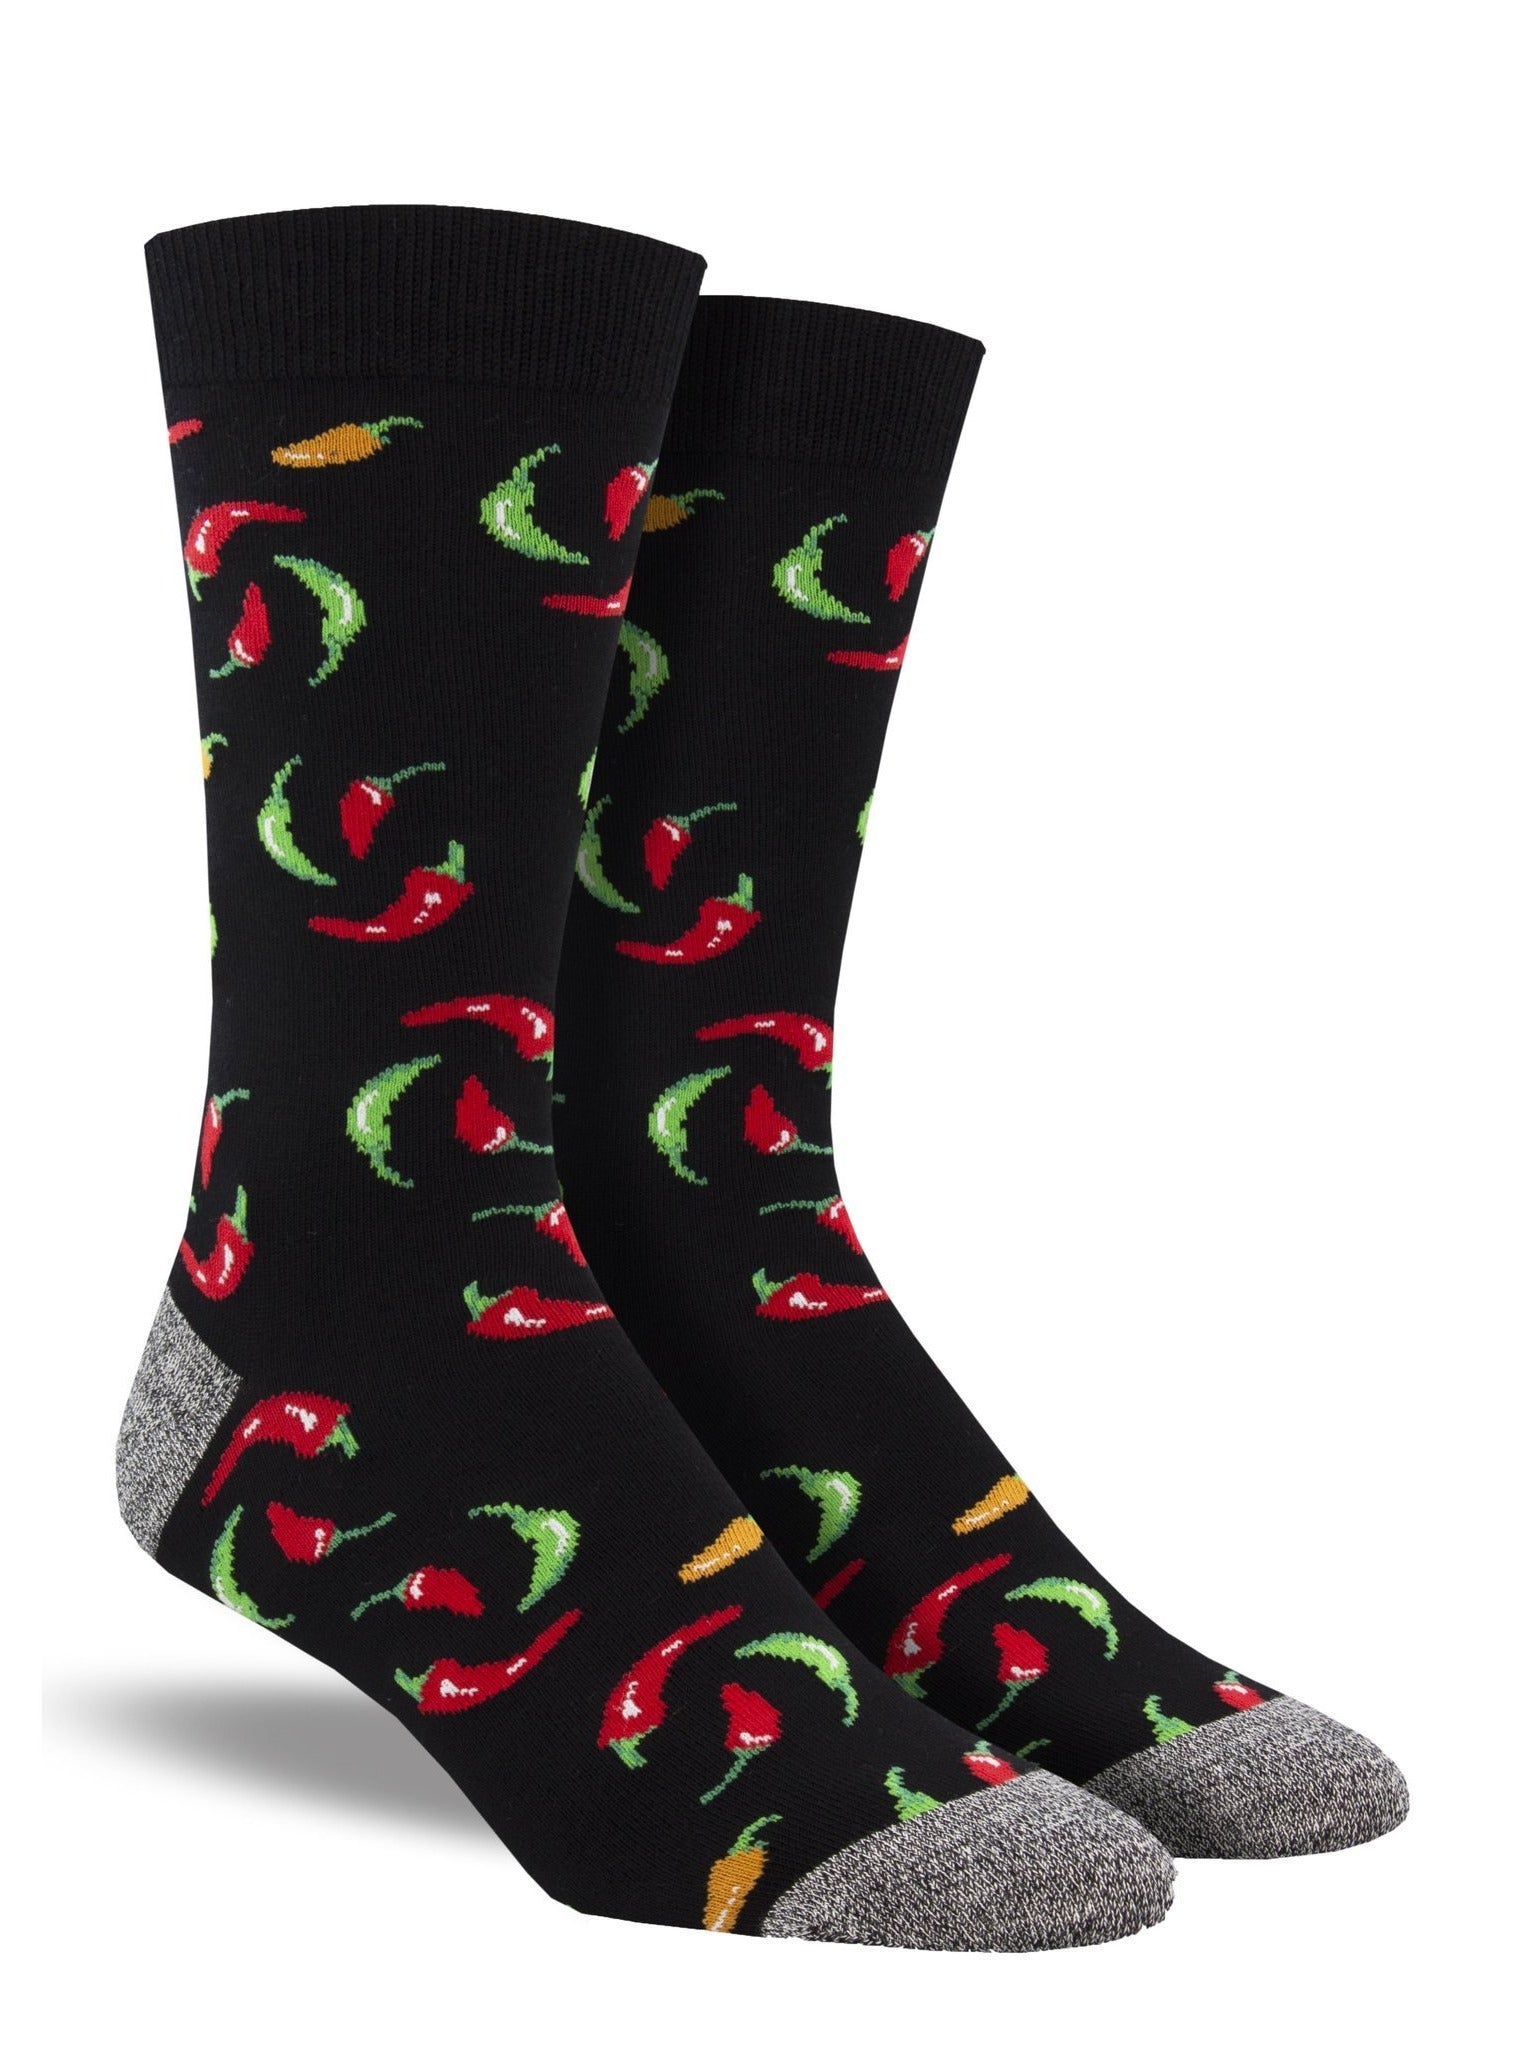 Shown on a leg form, a pair of Socksmith's bamboo men's crew socks in black with red, yellow and green hot chili peppers